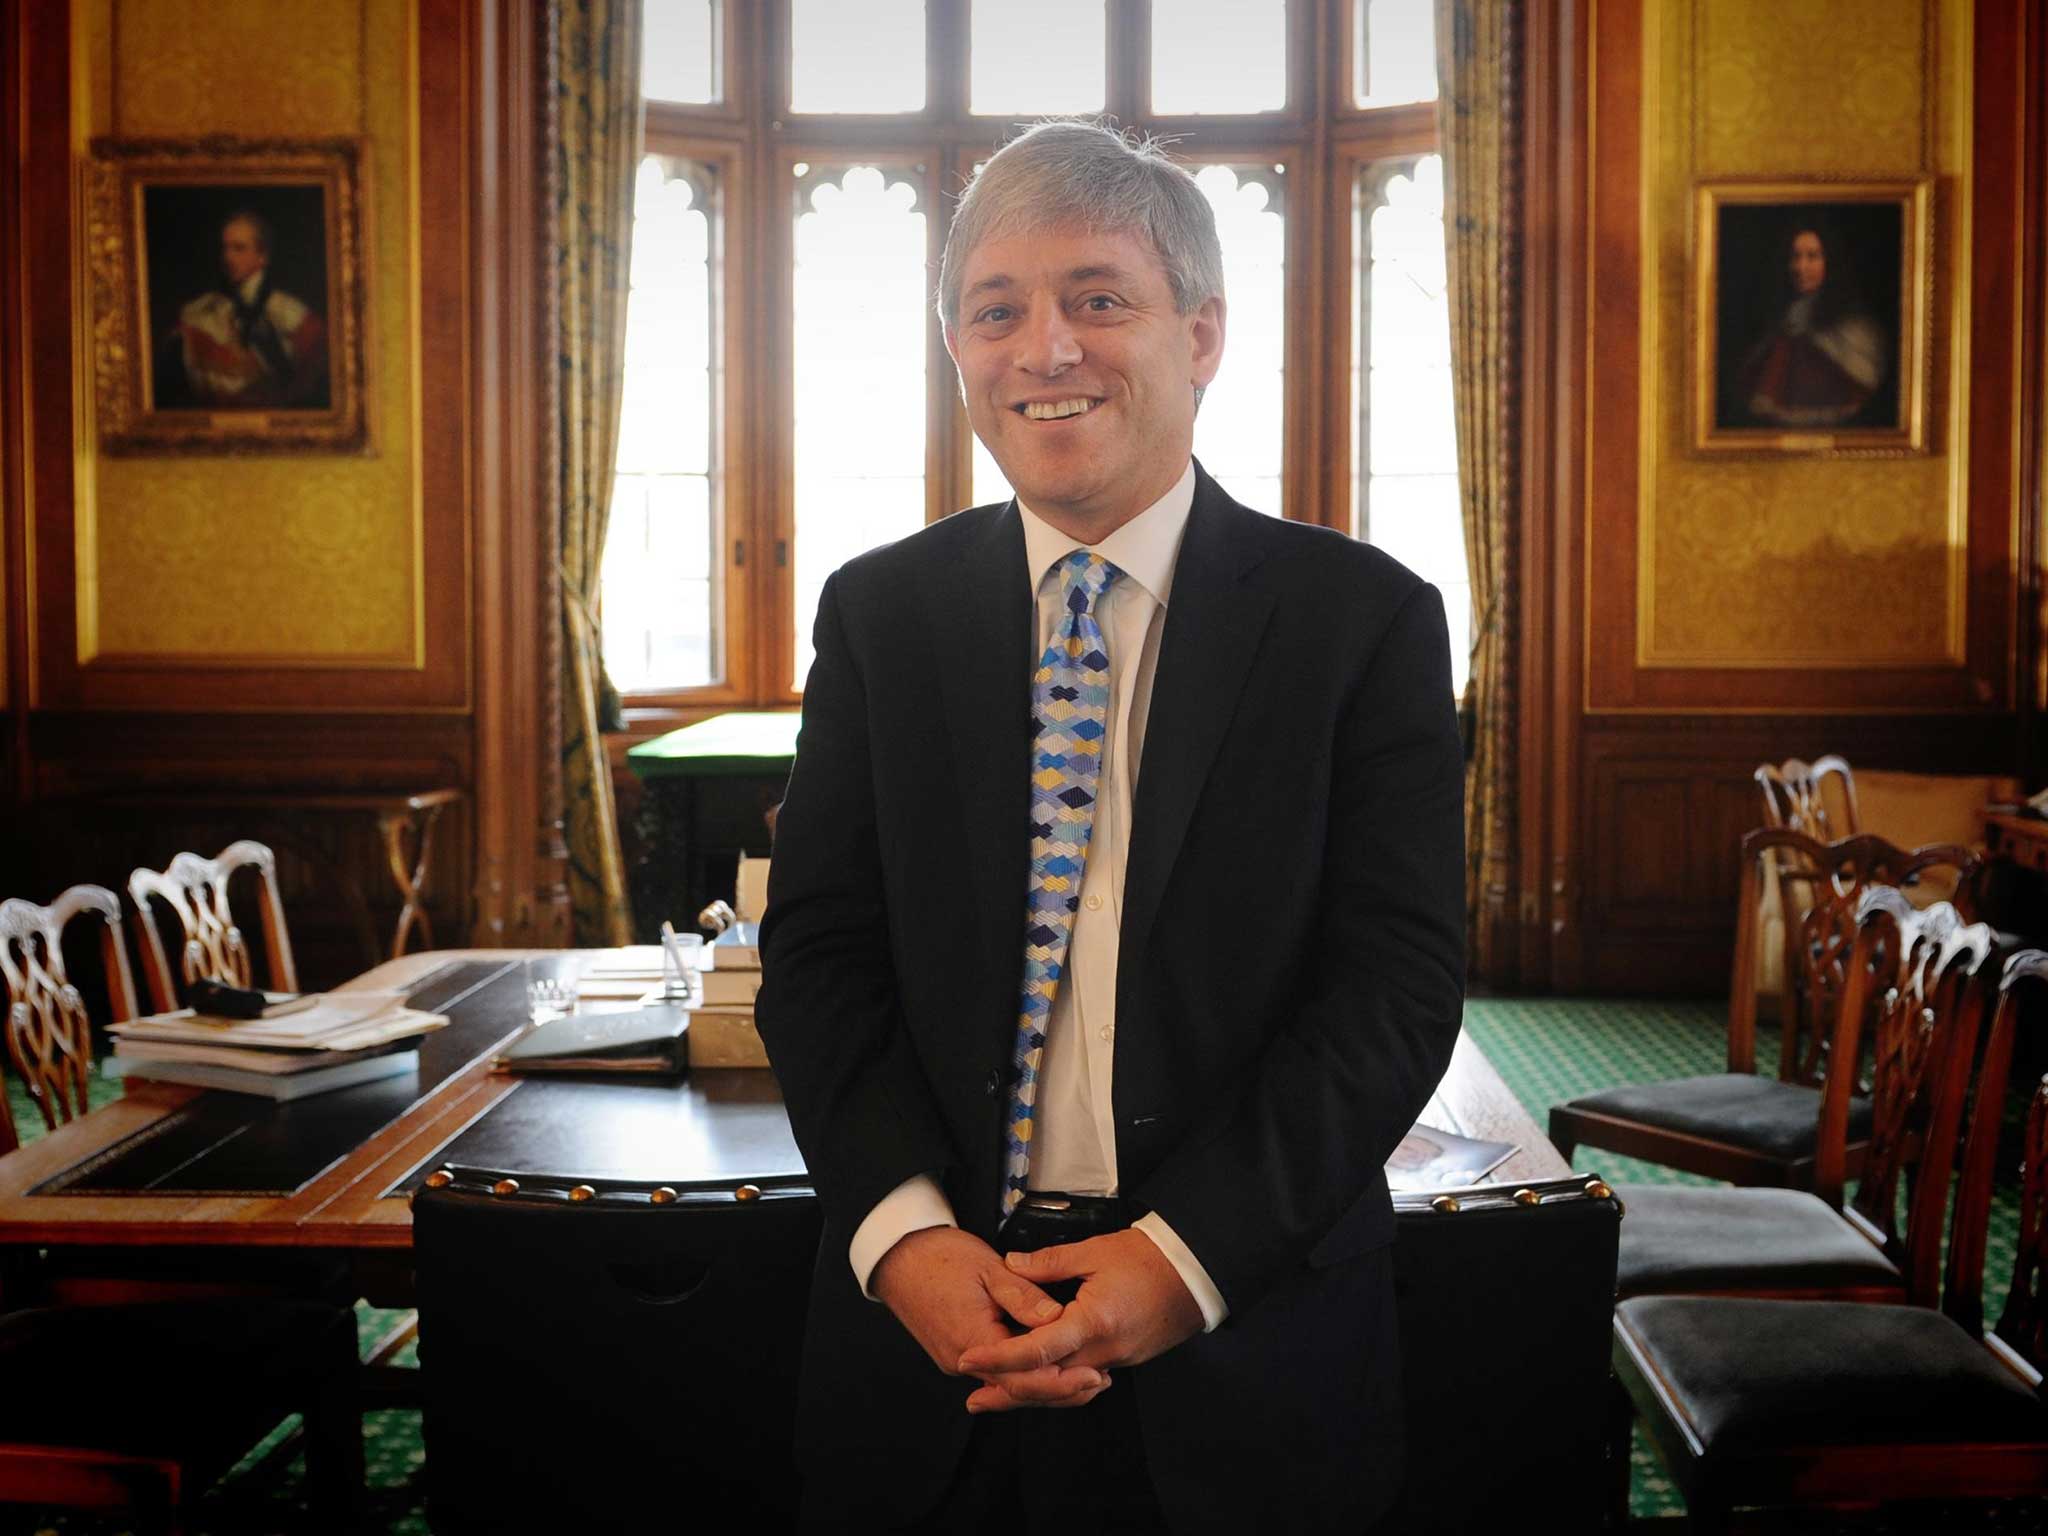 Many of John Bercow's constituents are unhappy cannot vote on issues which affect them